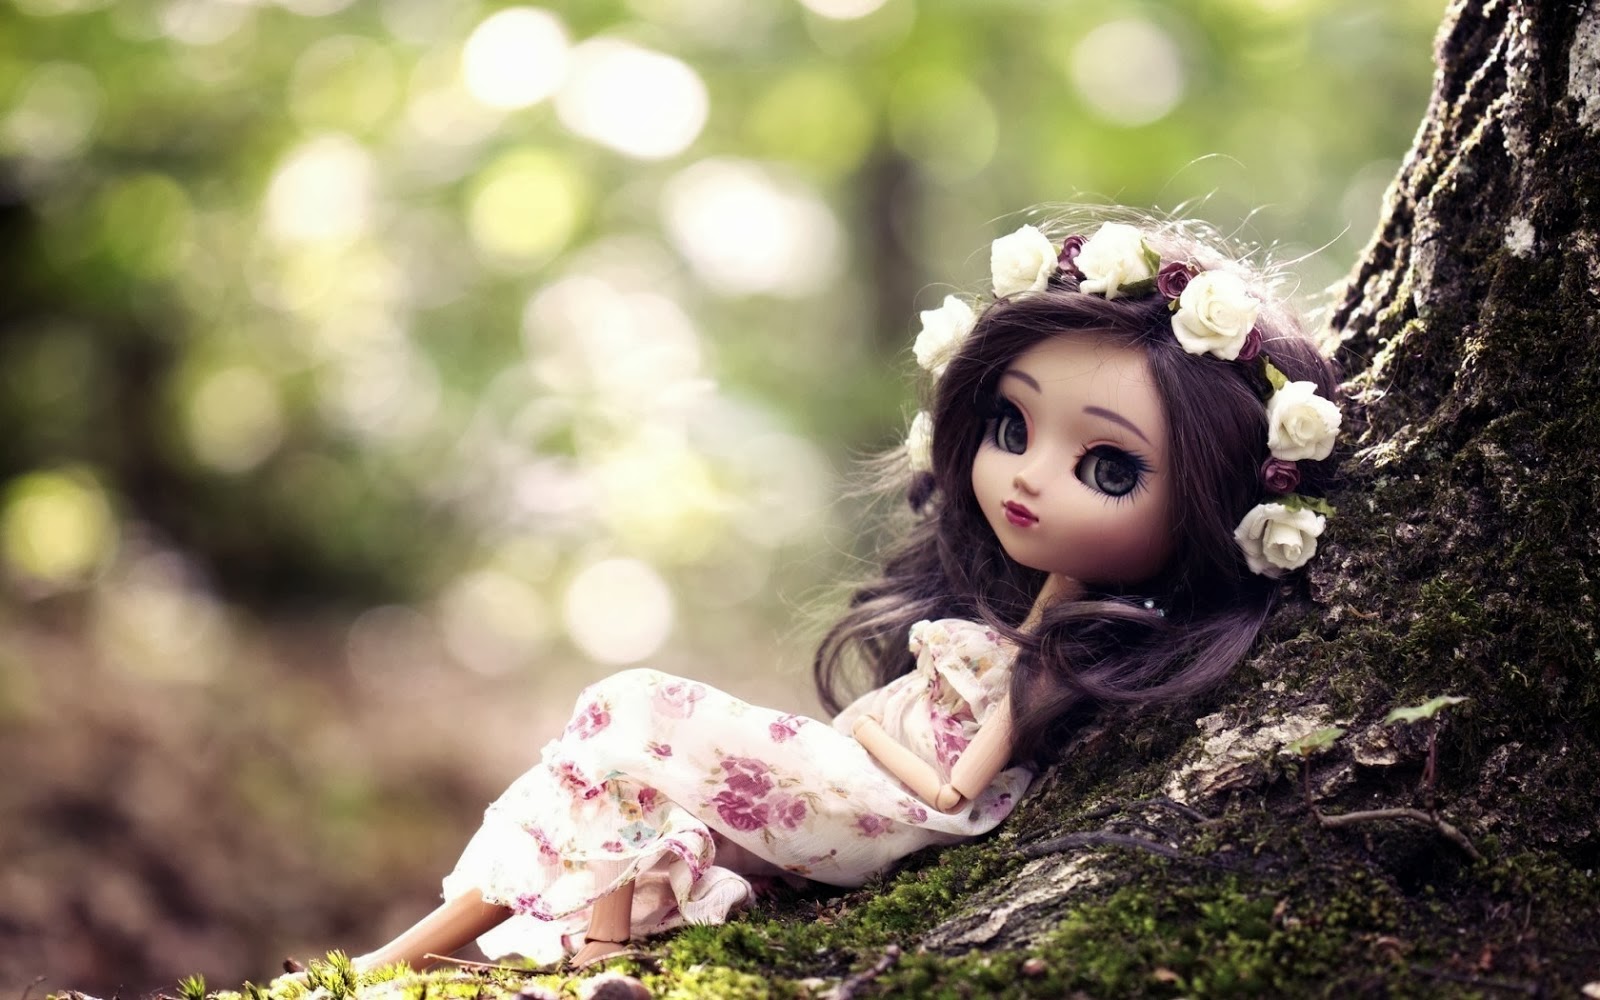  HD Wallpapers and Images of Cute Dolls which are given below